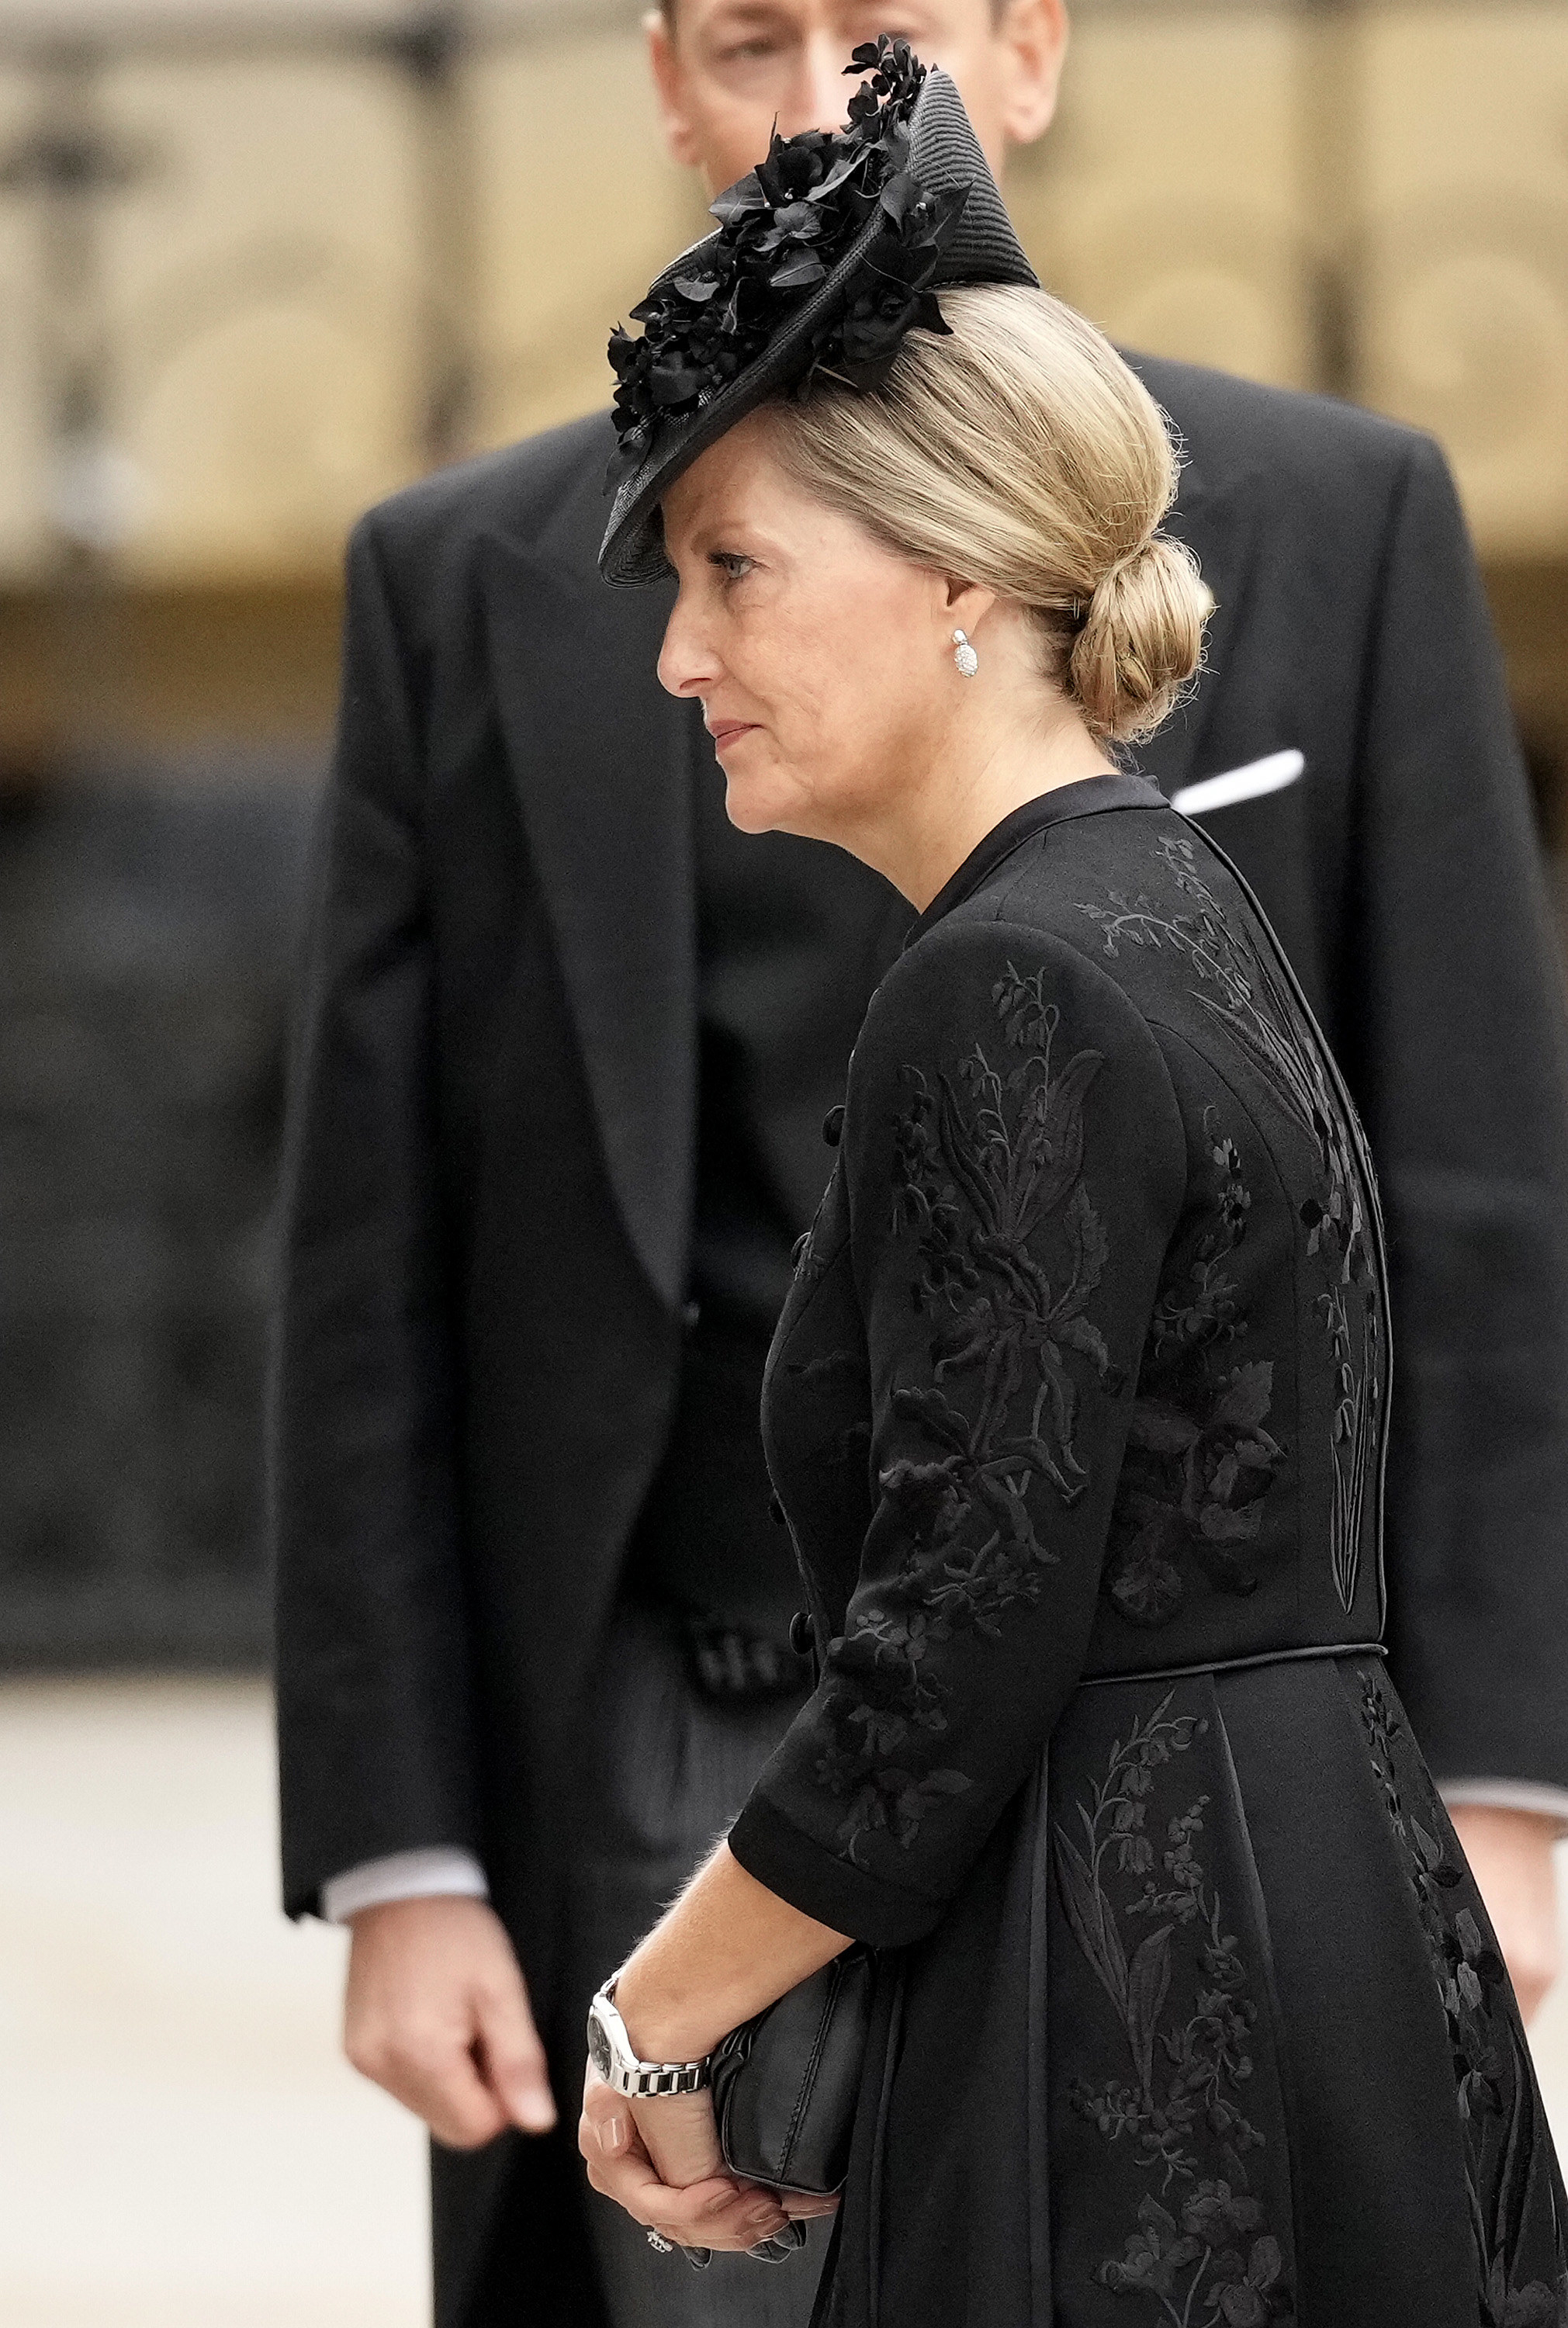 Sophie wears a black dress and hat as she arrives for the funeral